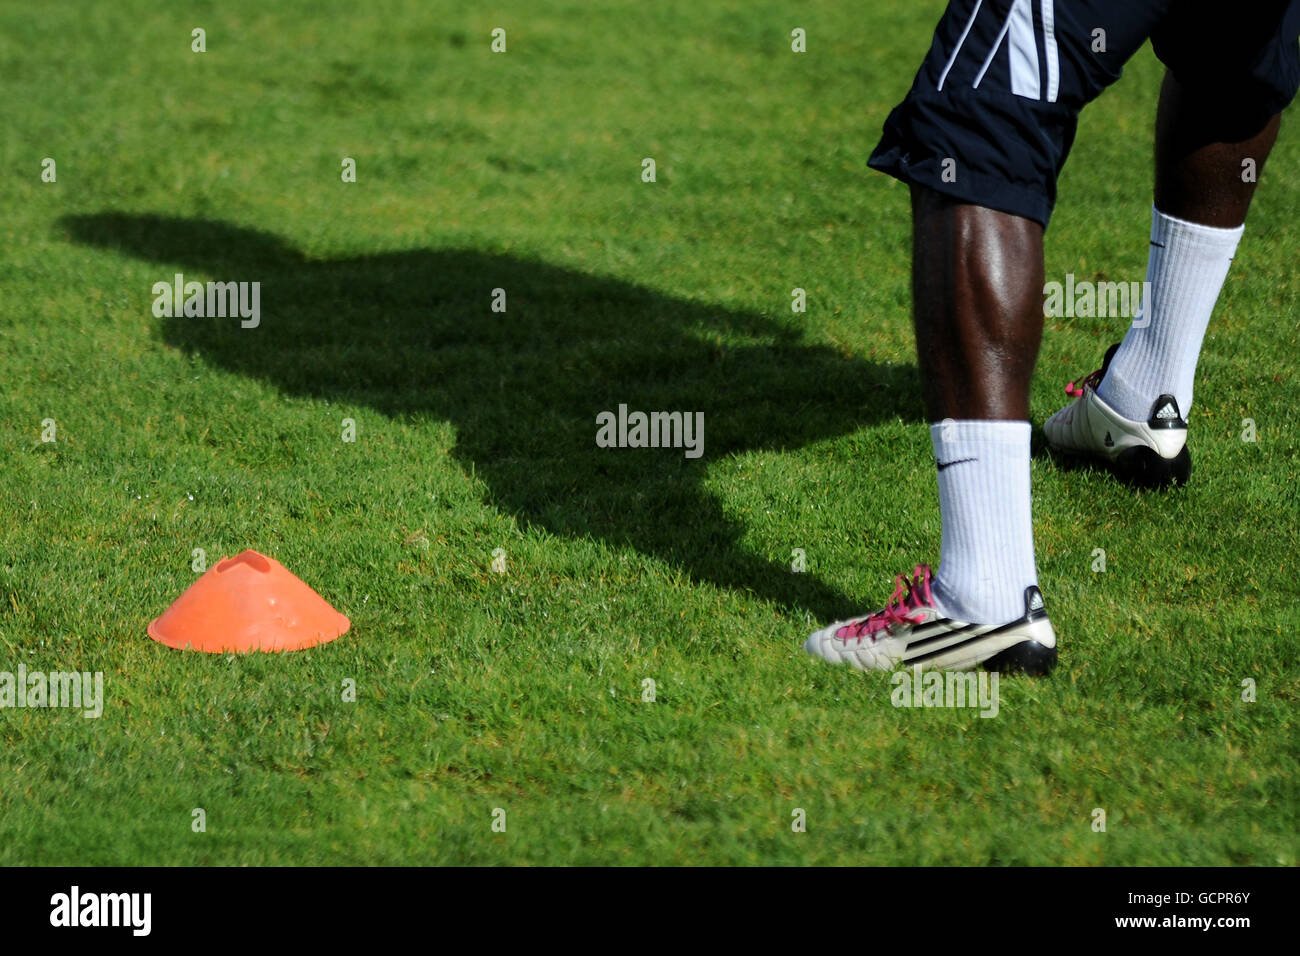 General view of a footballer wearing a pair of adidas football boots casting a shadow as he runs around a training cone Stock Photo